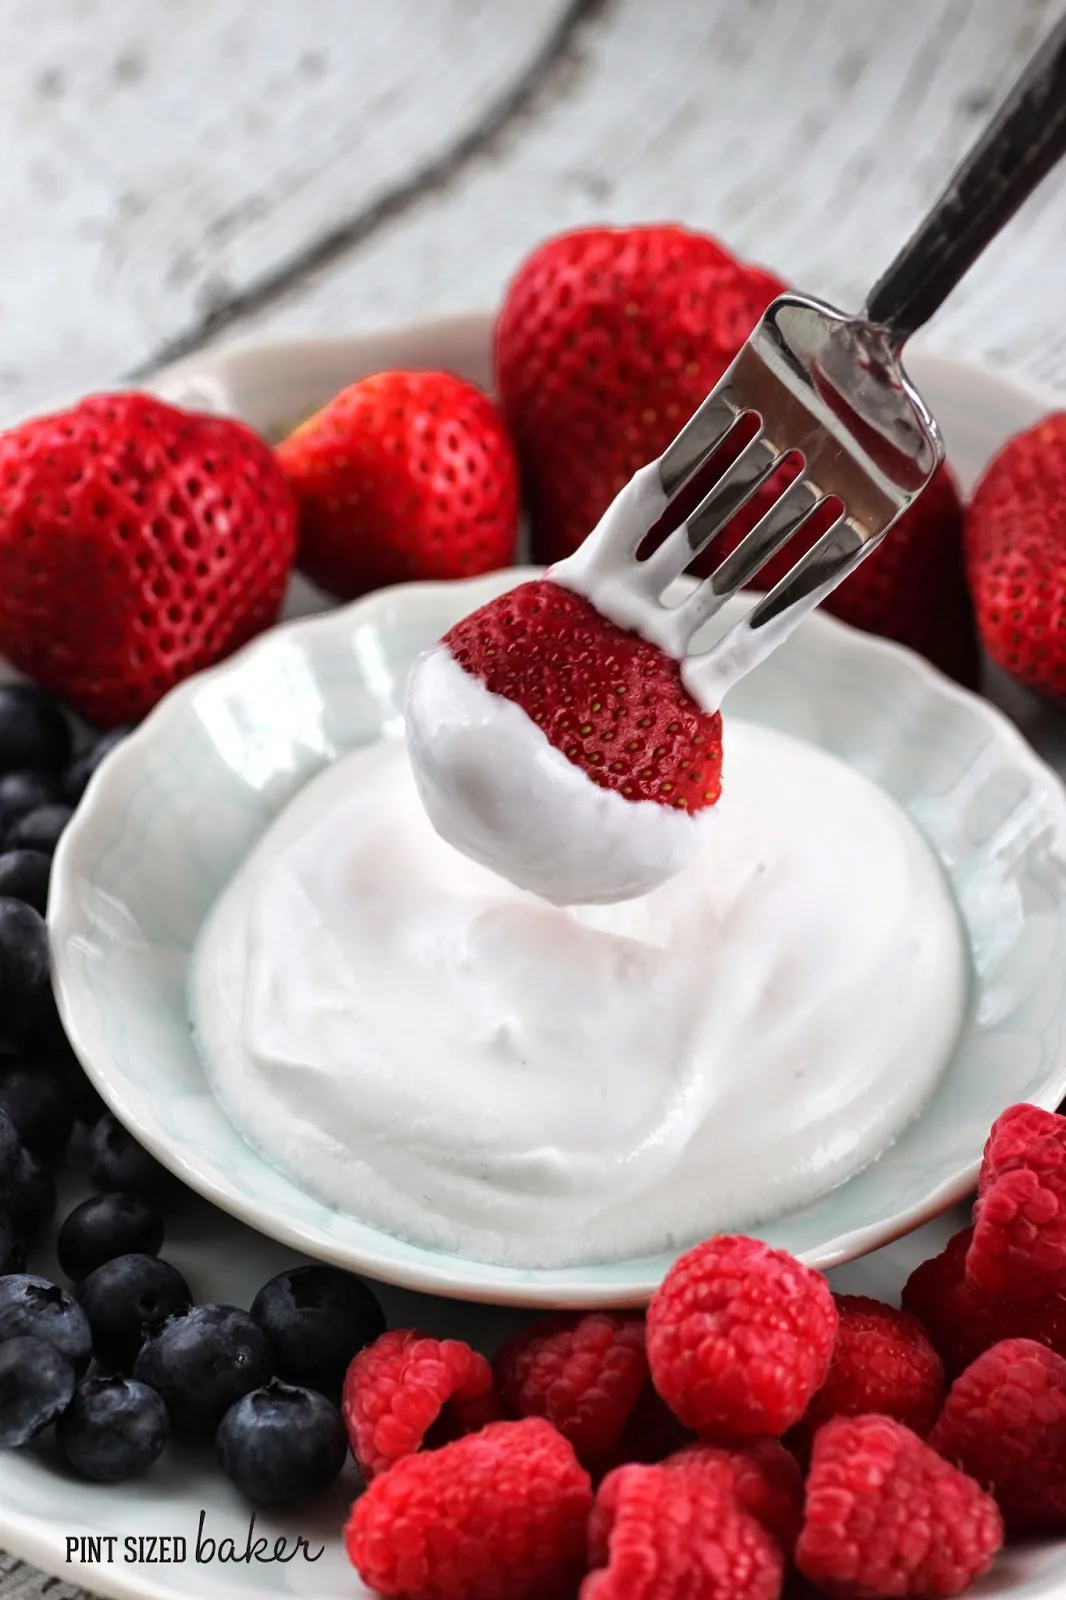 This whipped coconut cream is the perfect whipped cream replacement. My family loves it and I love that it's so healthy for them!